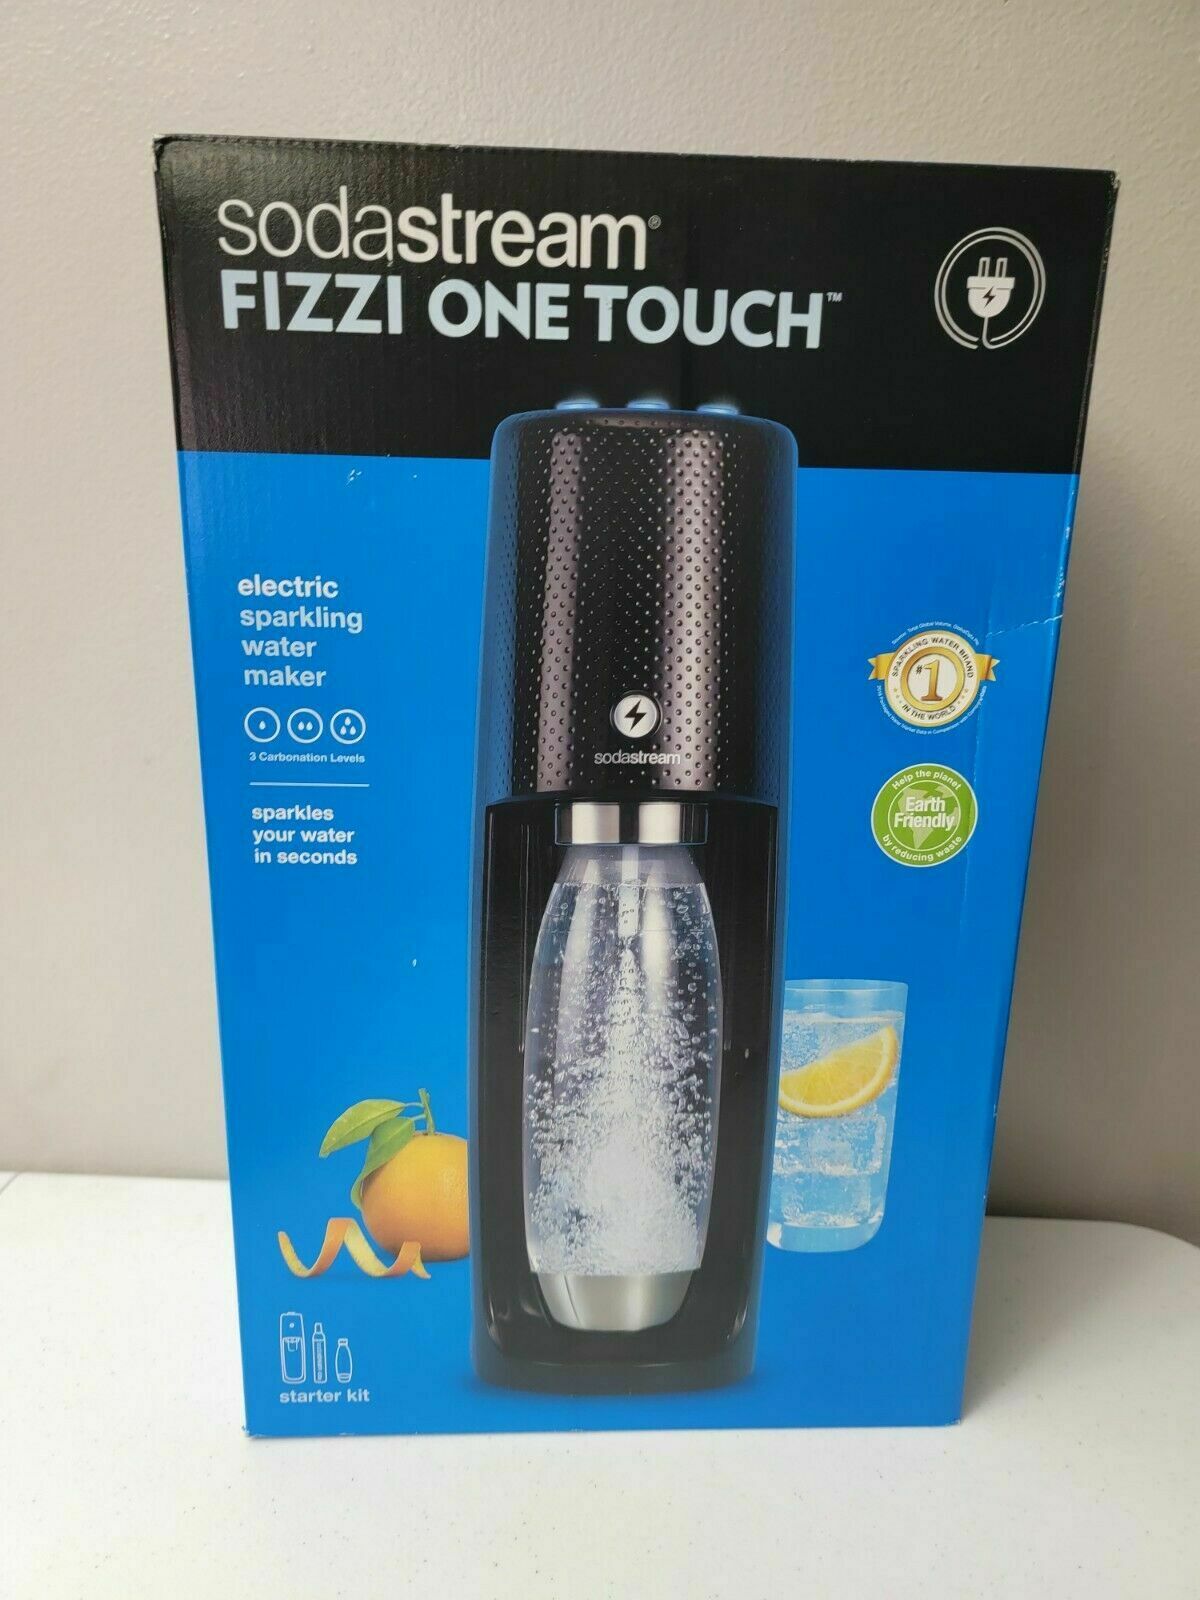 Sodastream - Fizzi One Touch Sparkling Water Maker Kit - Black